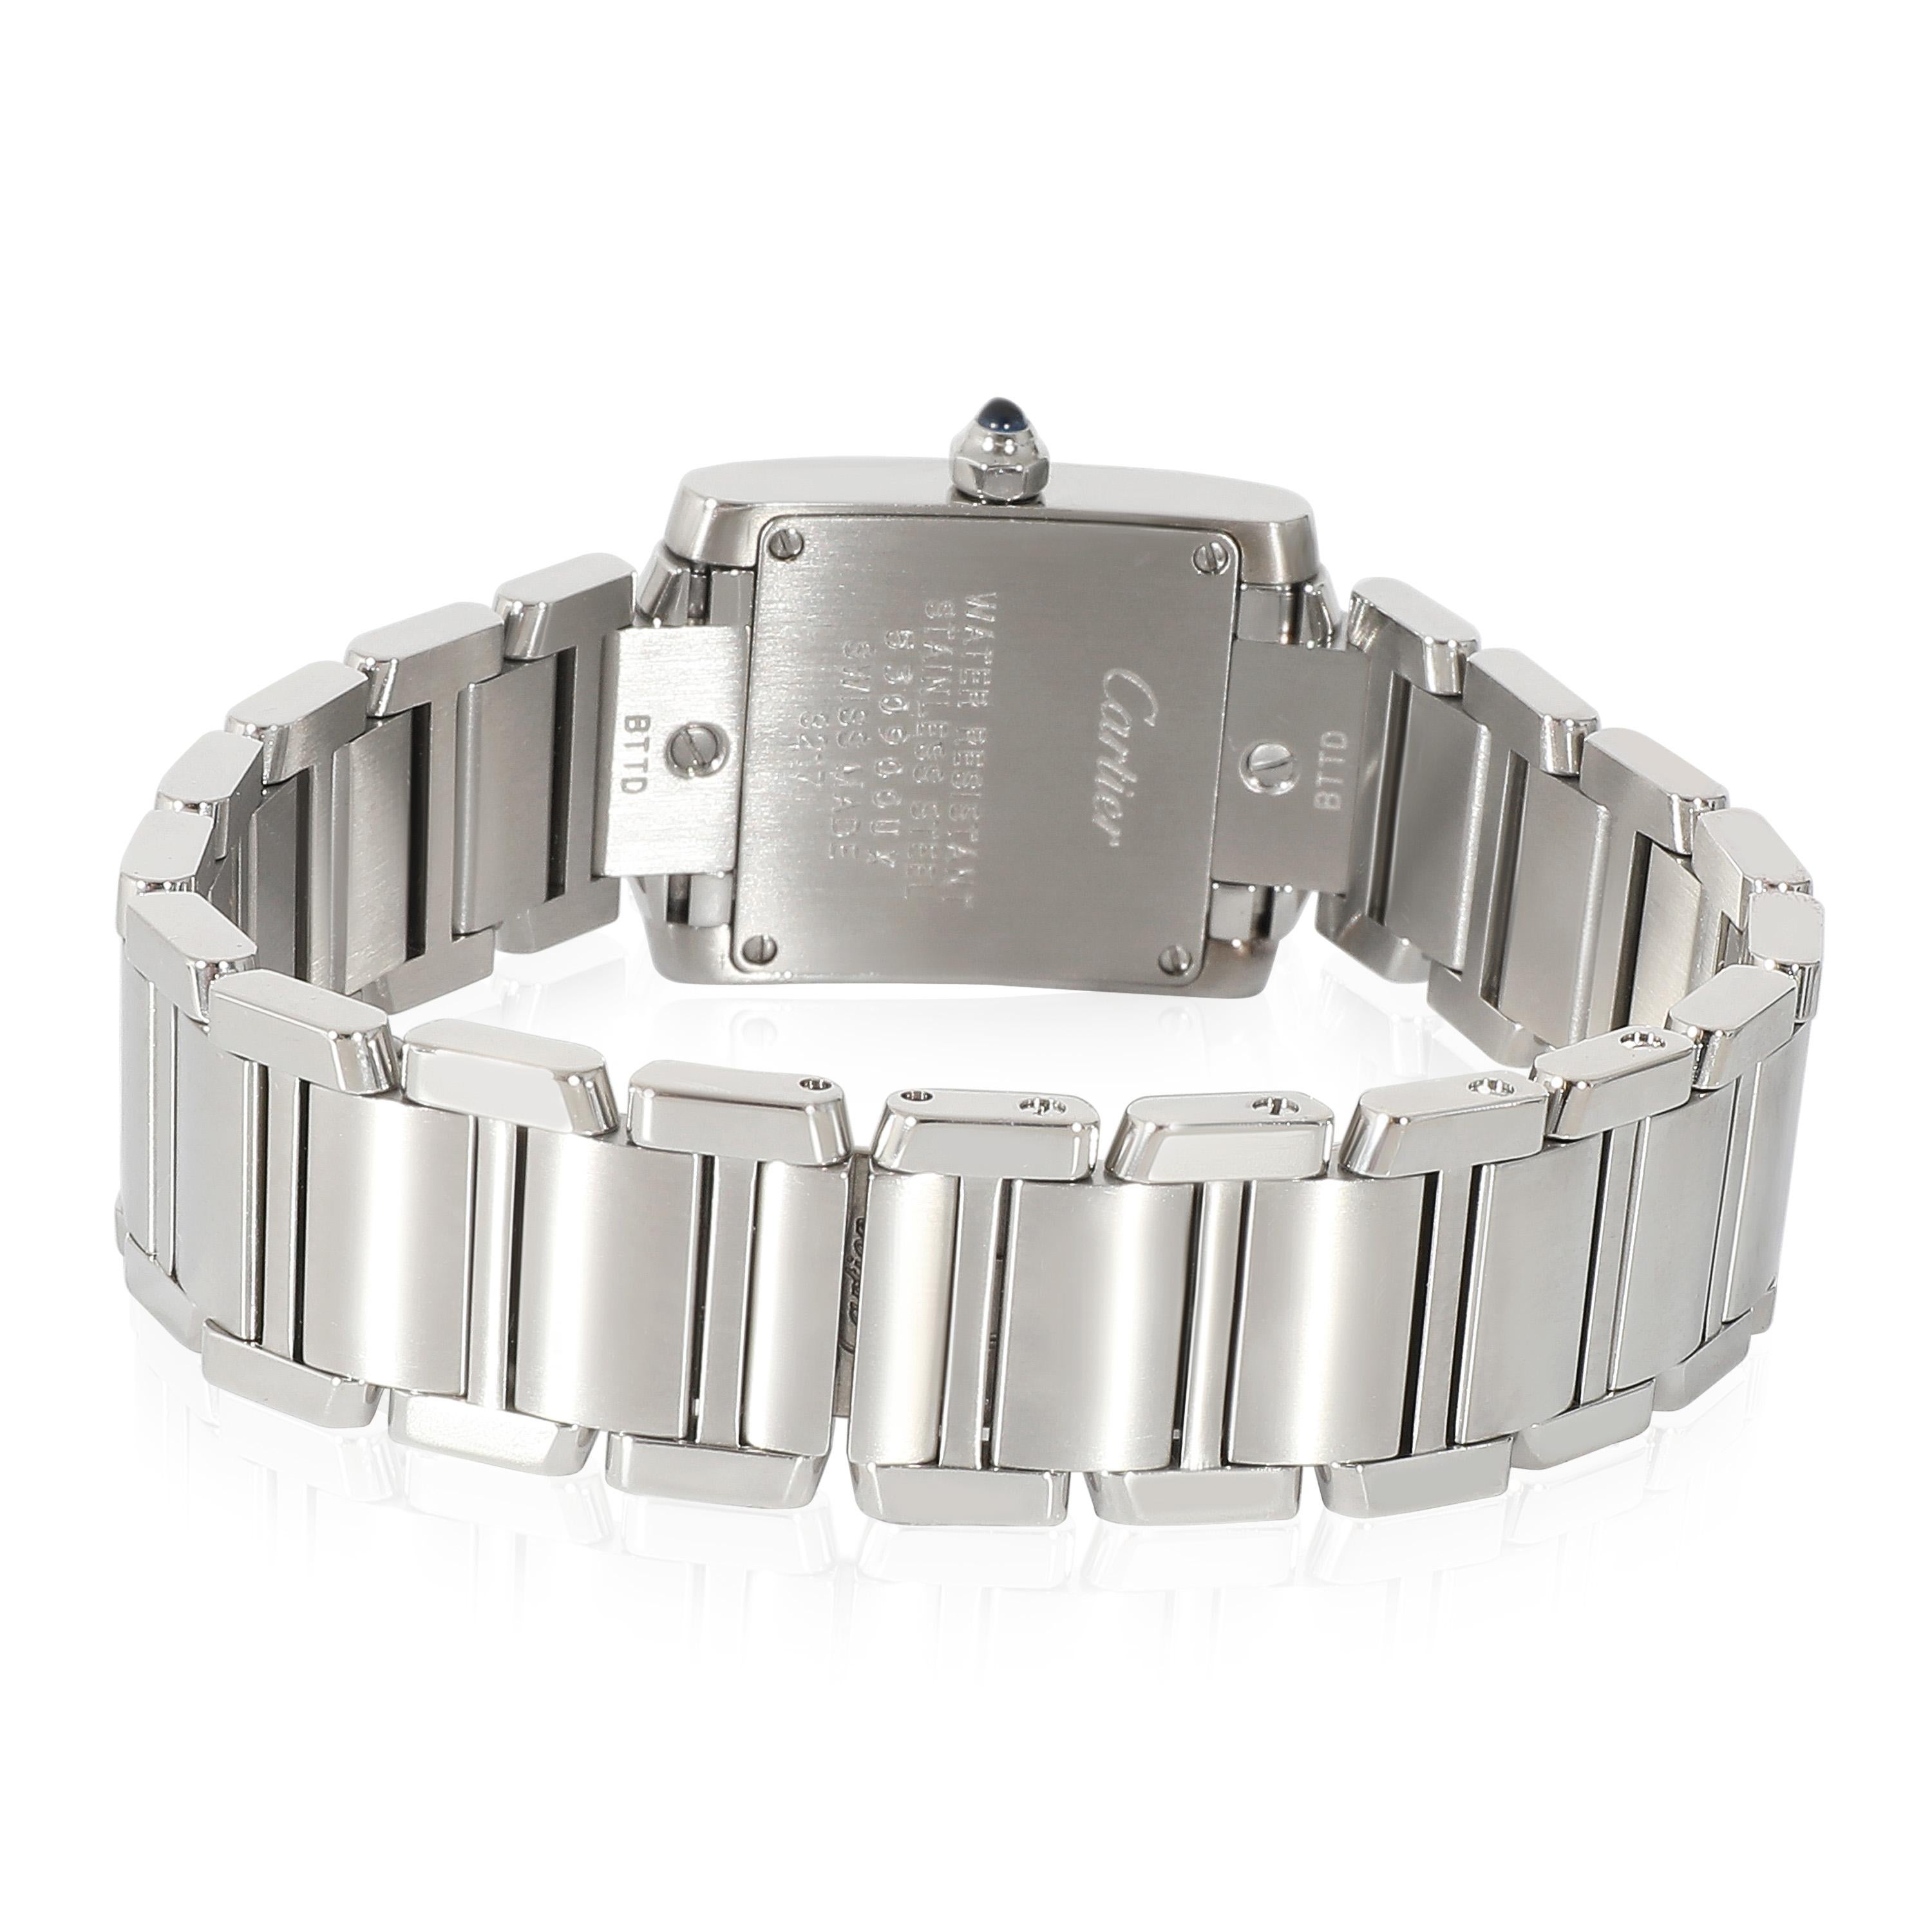 Cartier Tank Francaise WE110006 Women's Watch in Stainless Steel

SKU: 134106

PRIMARY DETAILS
Brand:  Cartier
Model: Tank Francaise
Country of Origin: Switzerland
Movement Type: Quartz: Battery
Year Manufactured: 2016
Year of Manufacture: